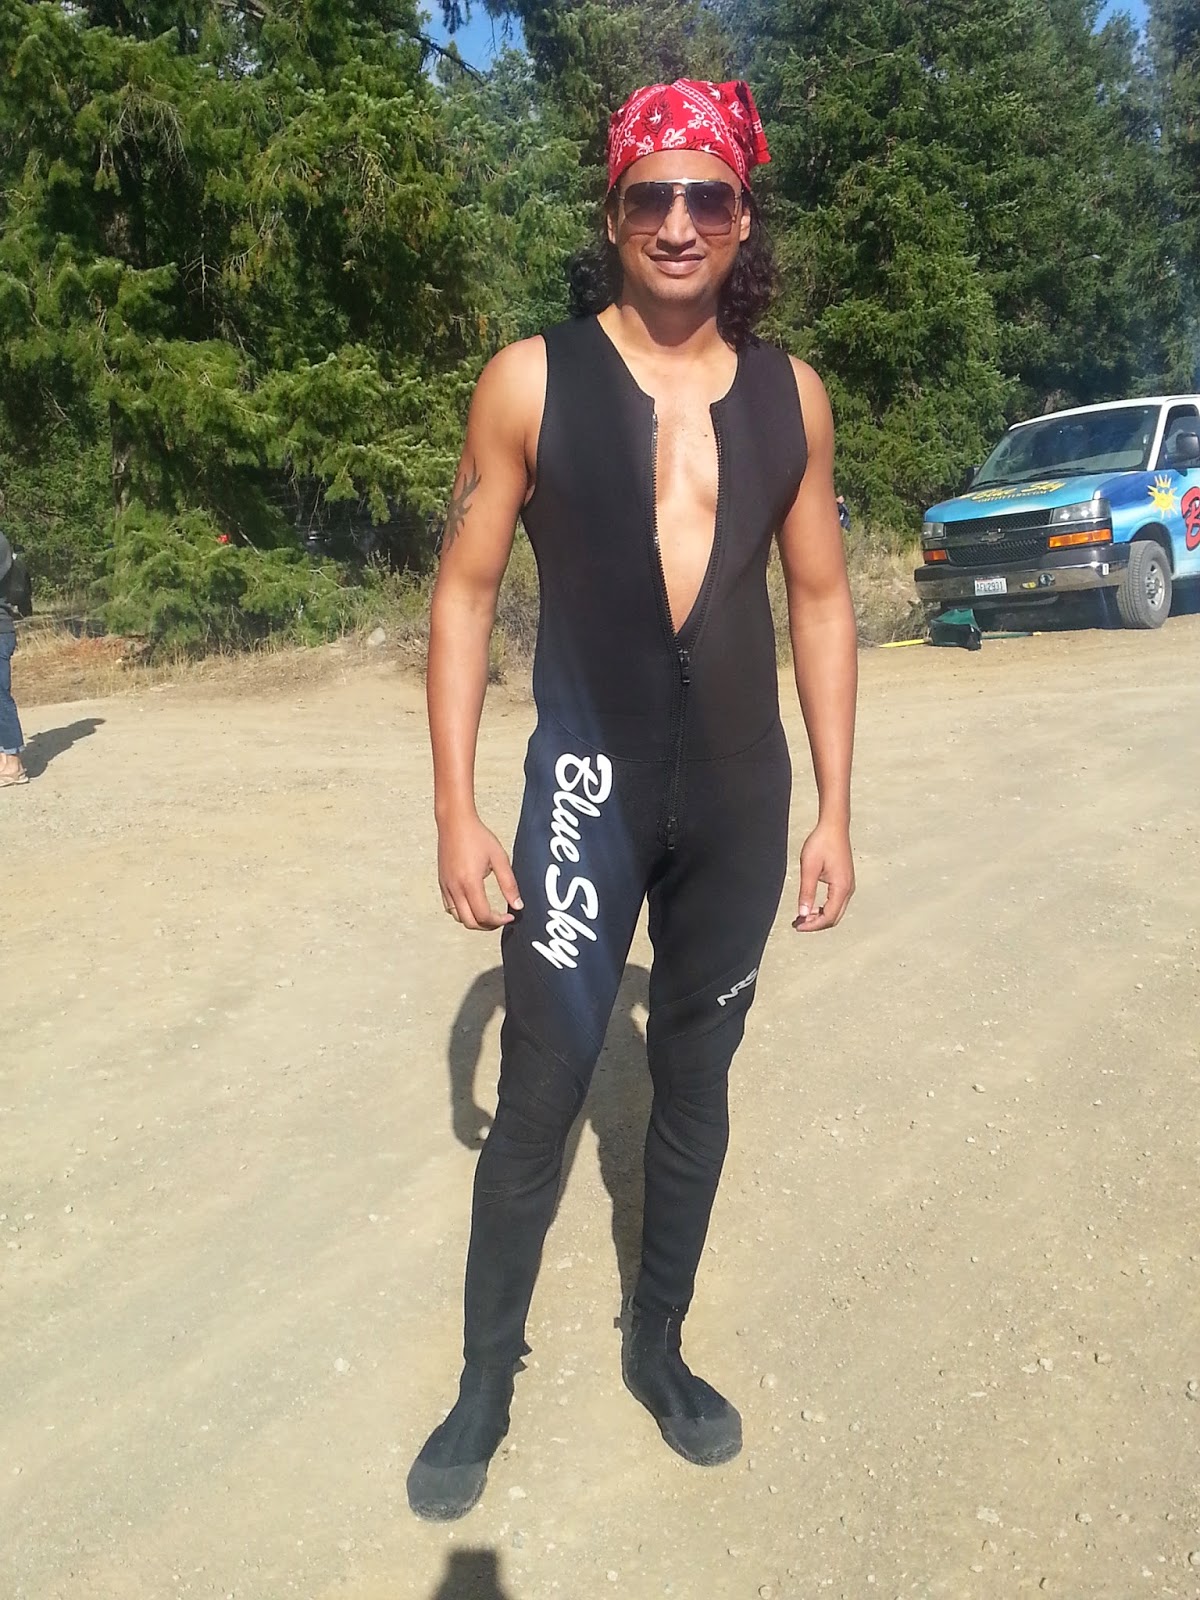 Best Rafting experience, Indian family outings in USA, Things to do near Seattle, Man in black wet suits